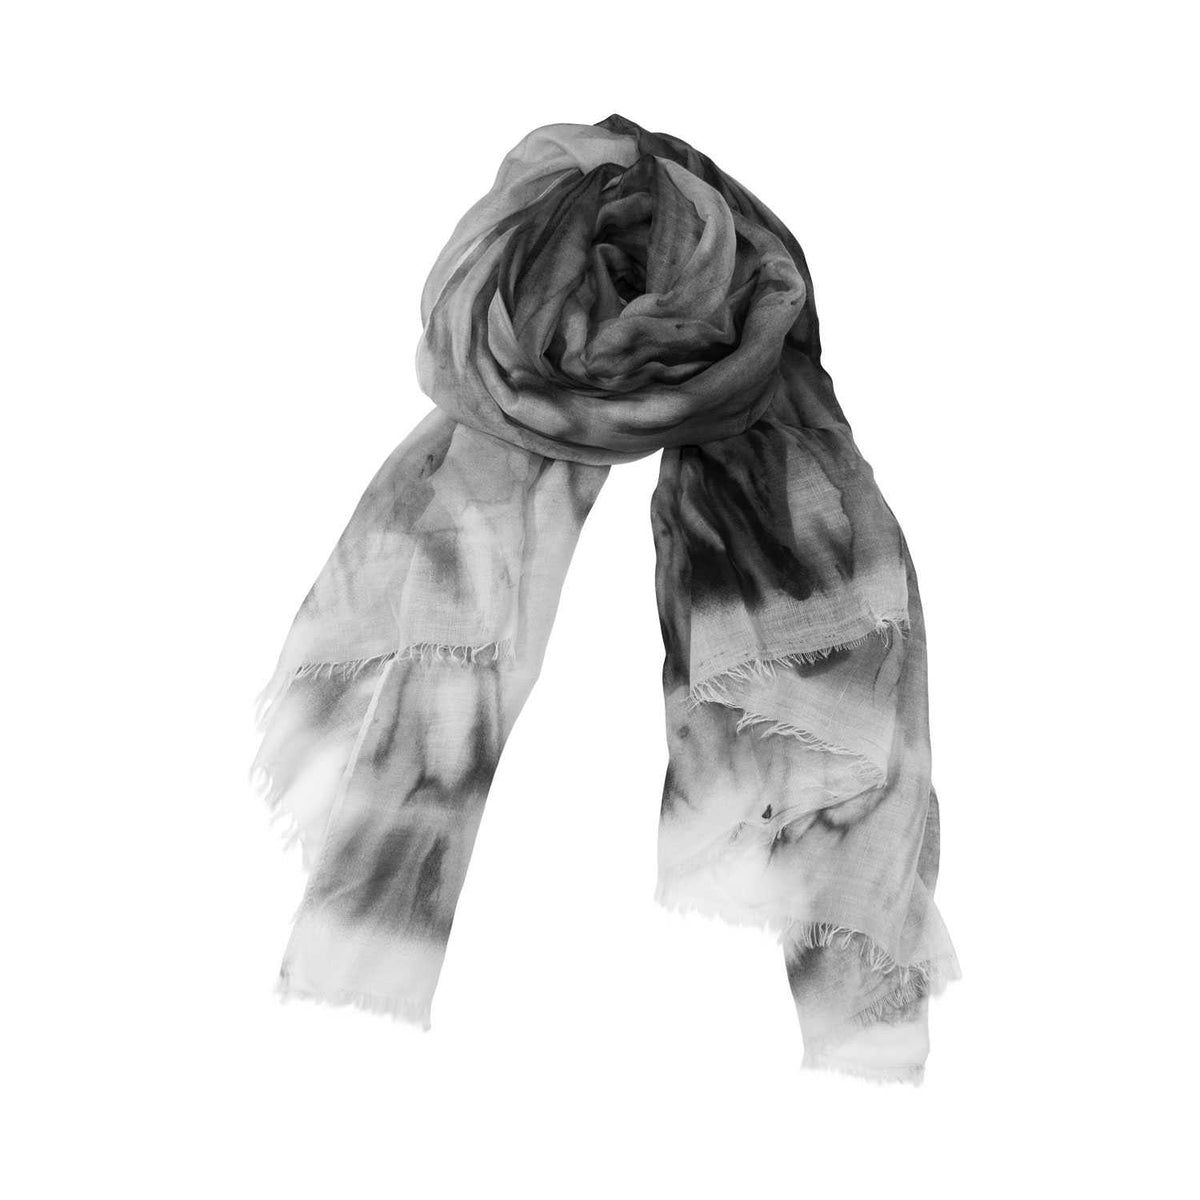 Black and White Poetic Water Painting Fashion Scarves Wrap - Zestique